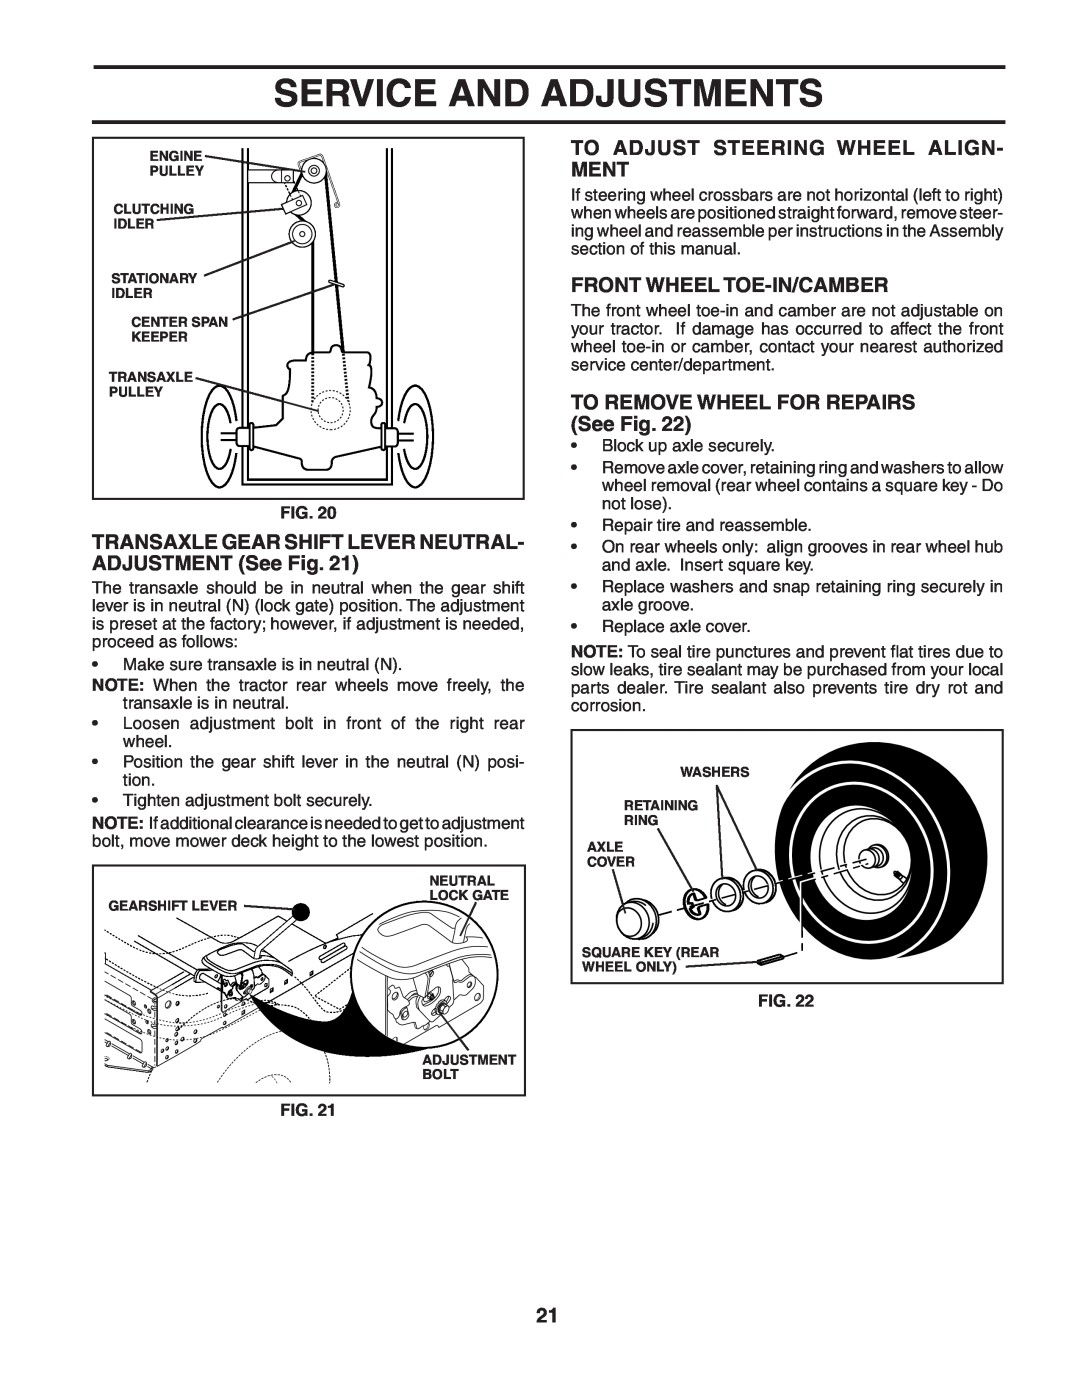 Weed Eater WET2242STB To Adjust Steering Wheel Align- Ment, Front Wheel Toe-In/Camber, TO REMOVE WHEEL FOR REPAIRS See Fig 